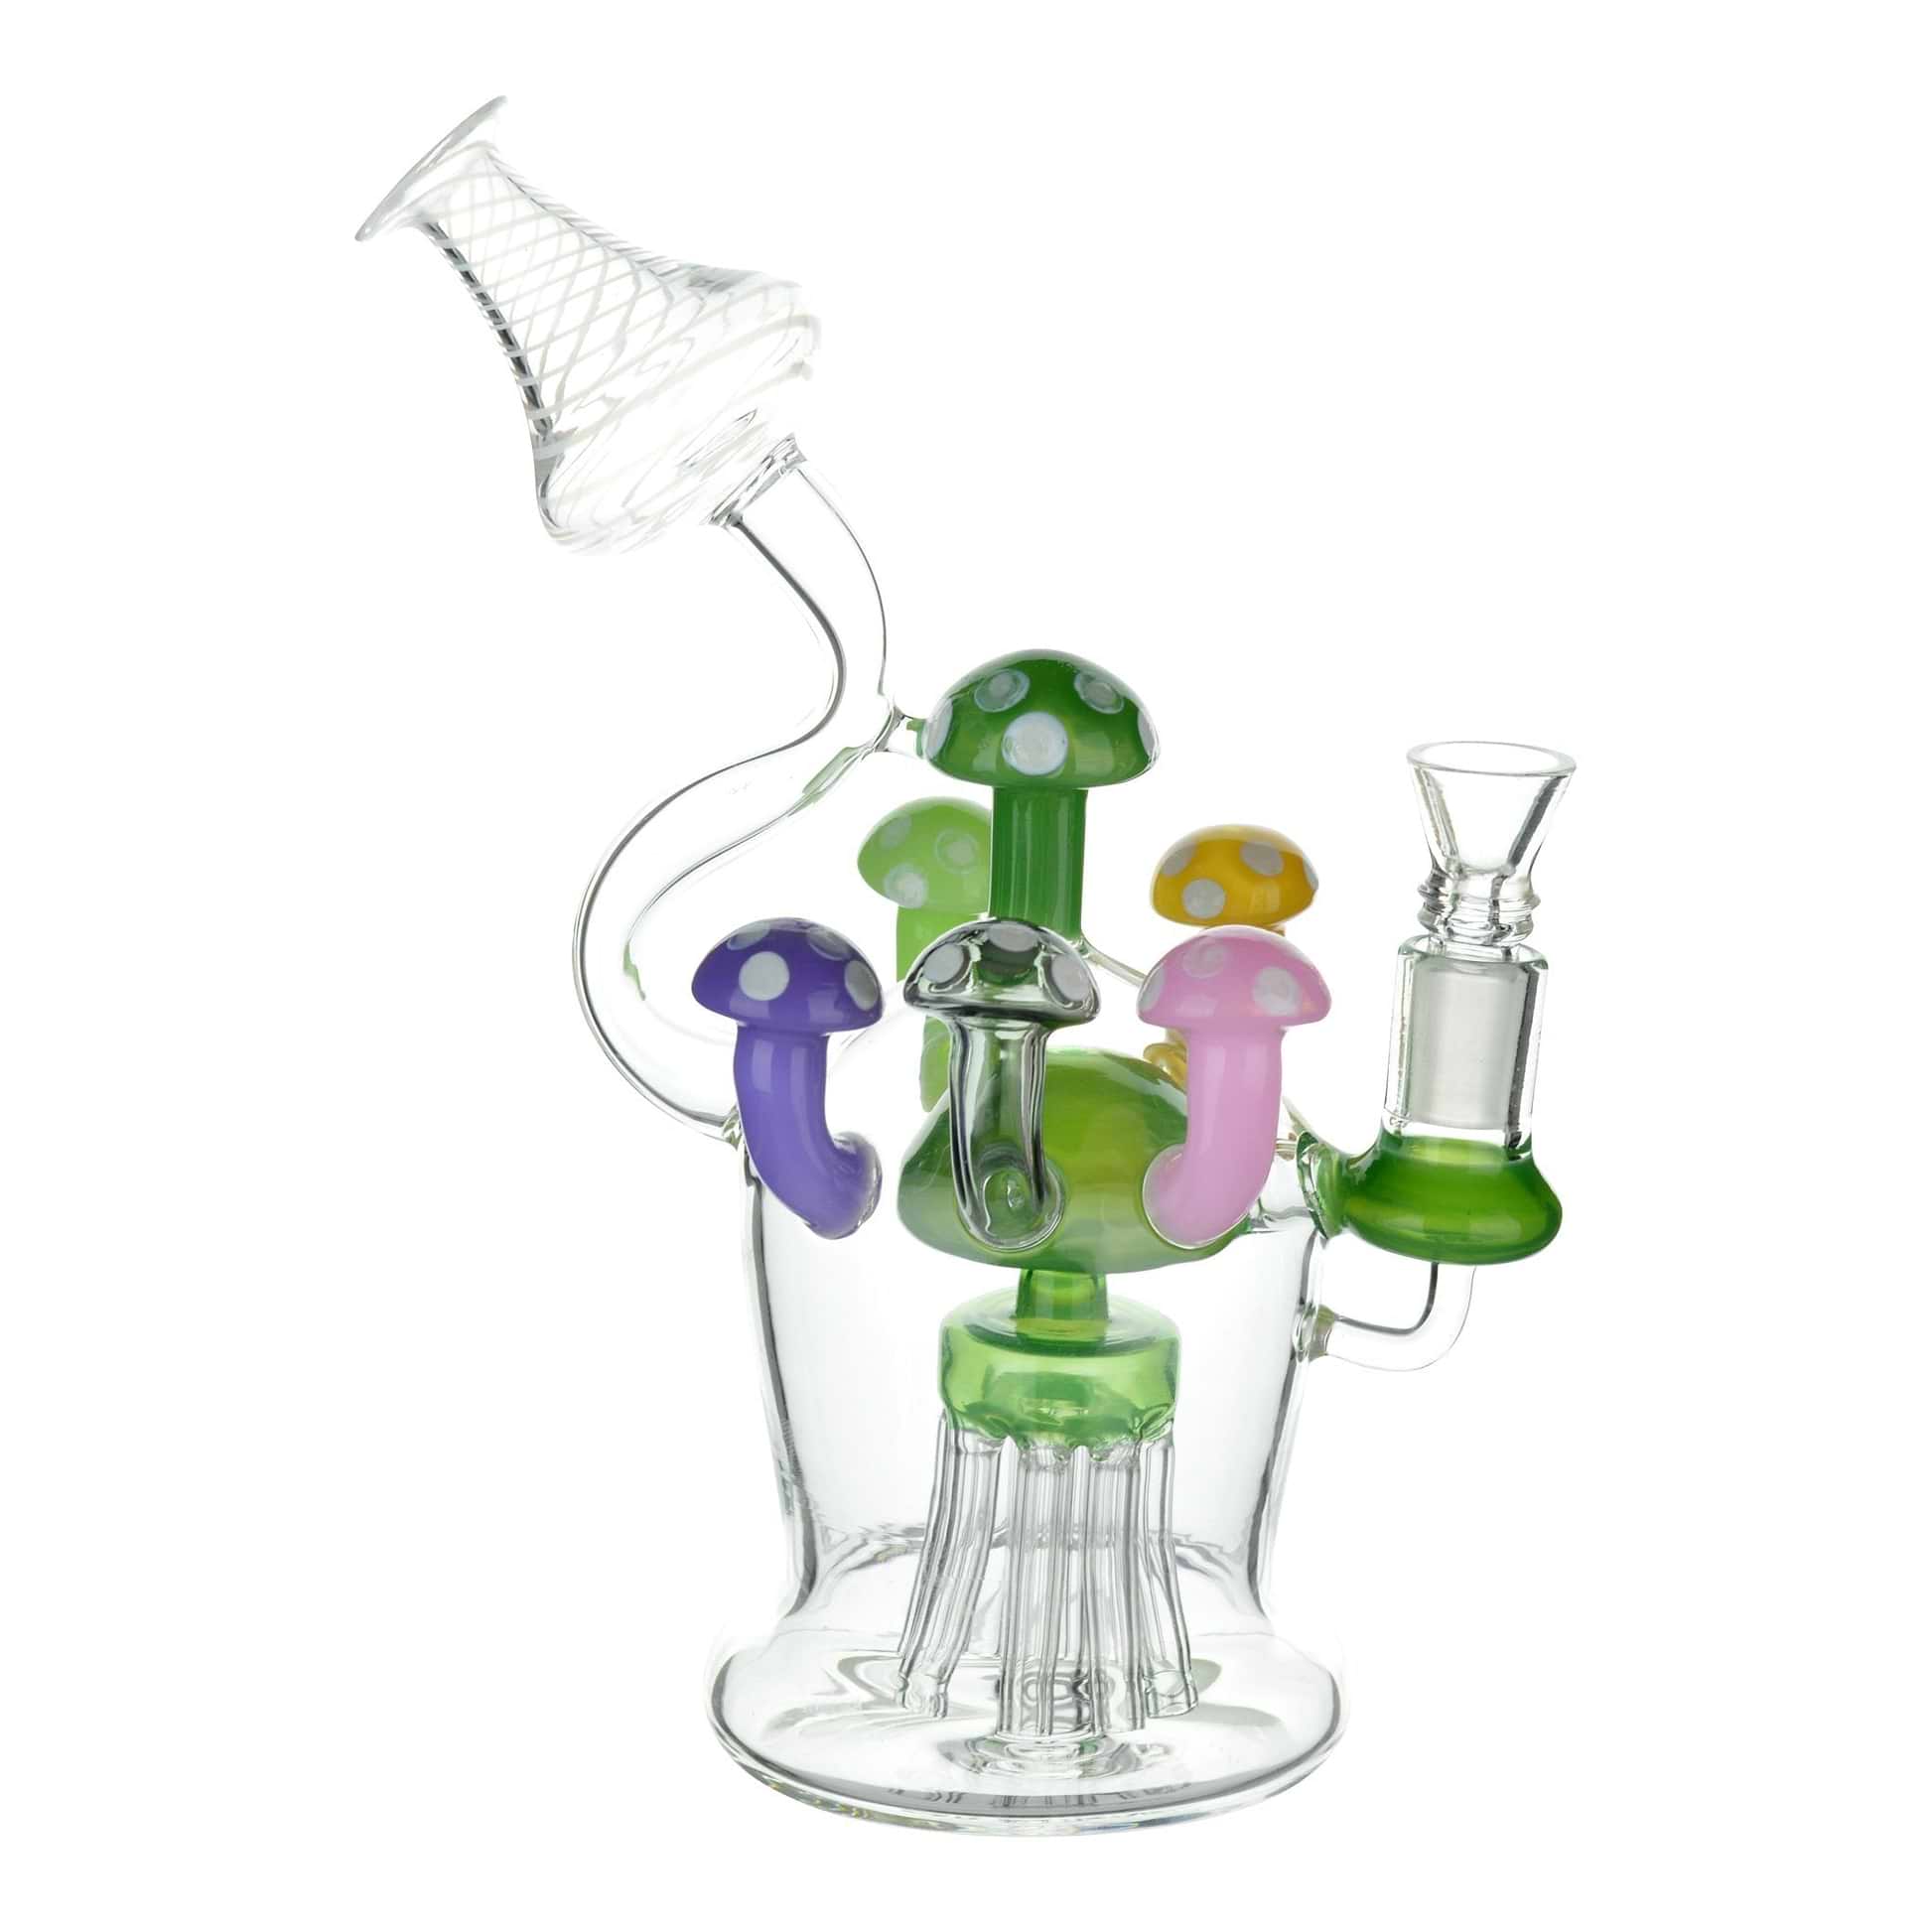 Full shot of glass recycler dab rig with colord mushroom percs mouthpiece facing left bowl on right